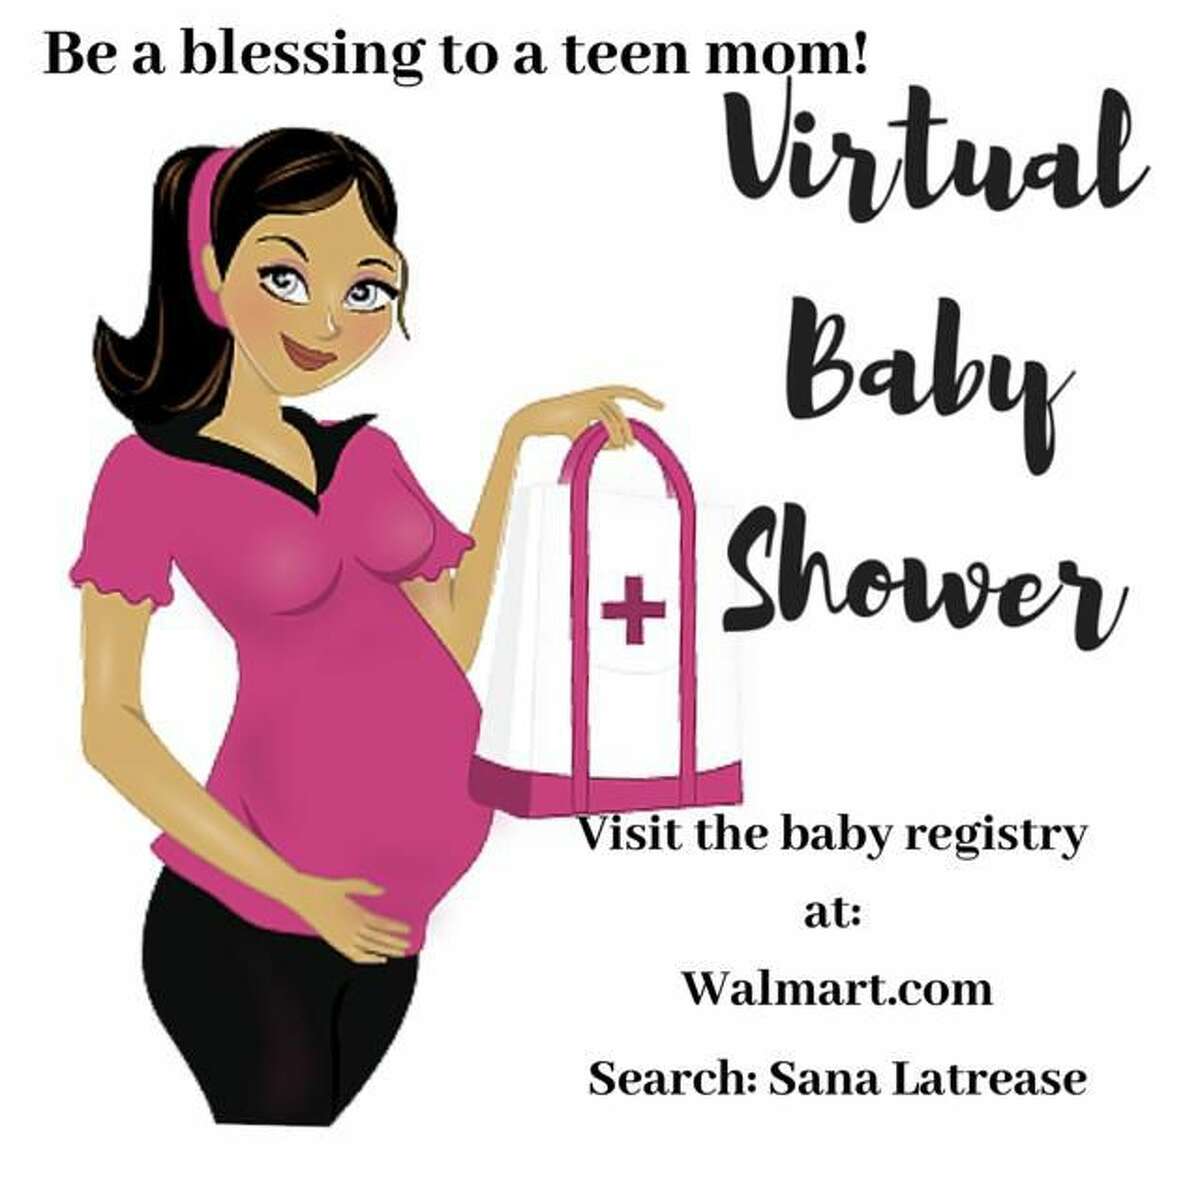 Sana L. Cotten of Middletown is hosting a virtual baby shower for two women, collecting items through a registry on Walmart.com.